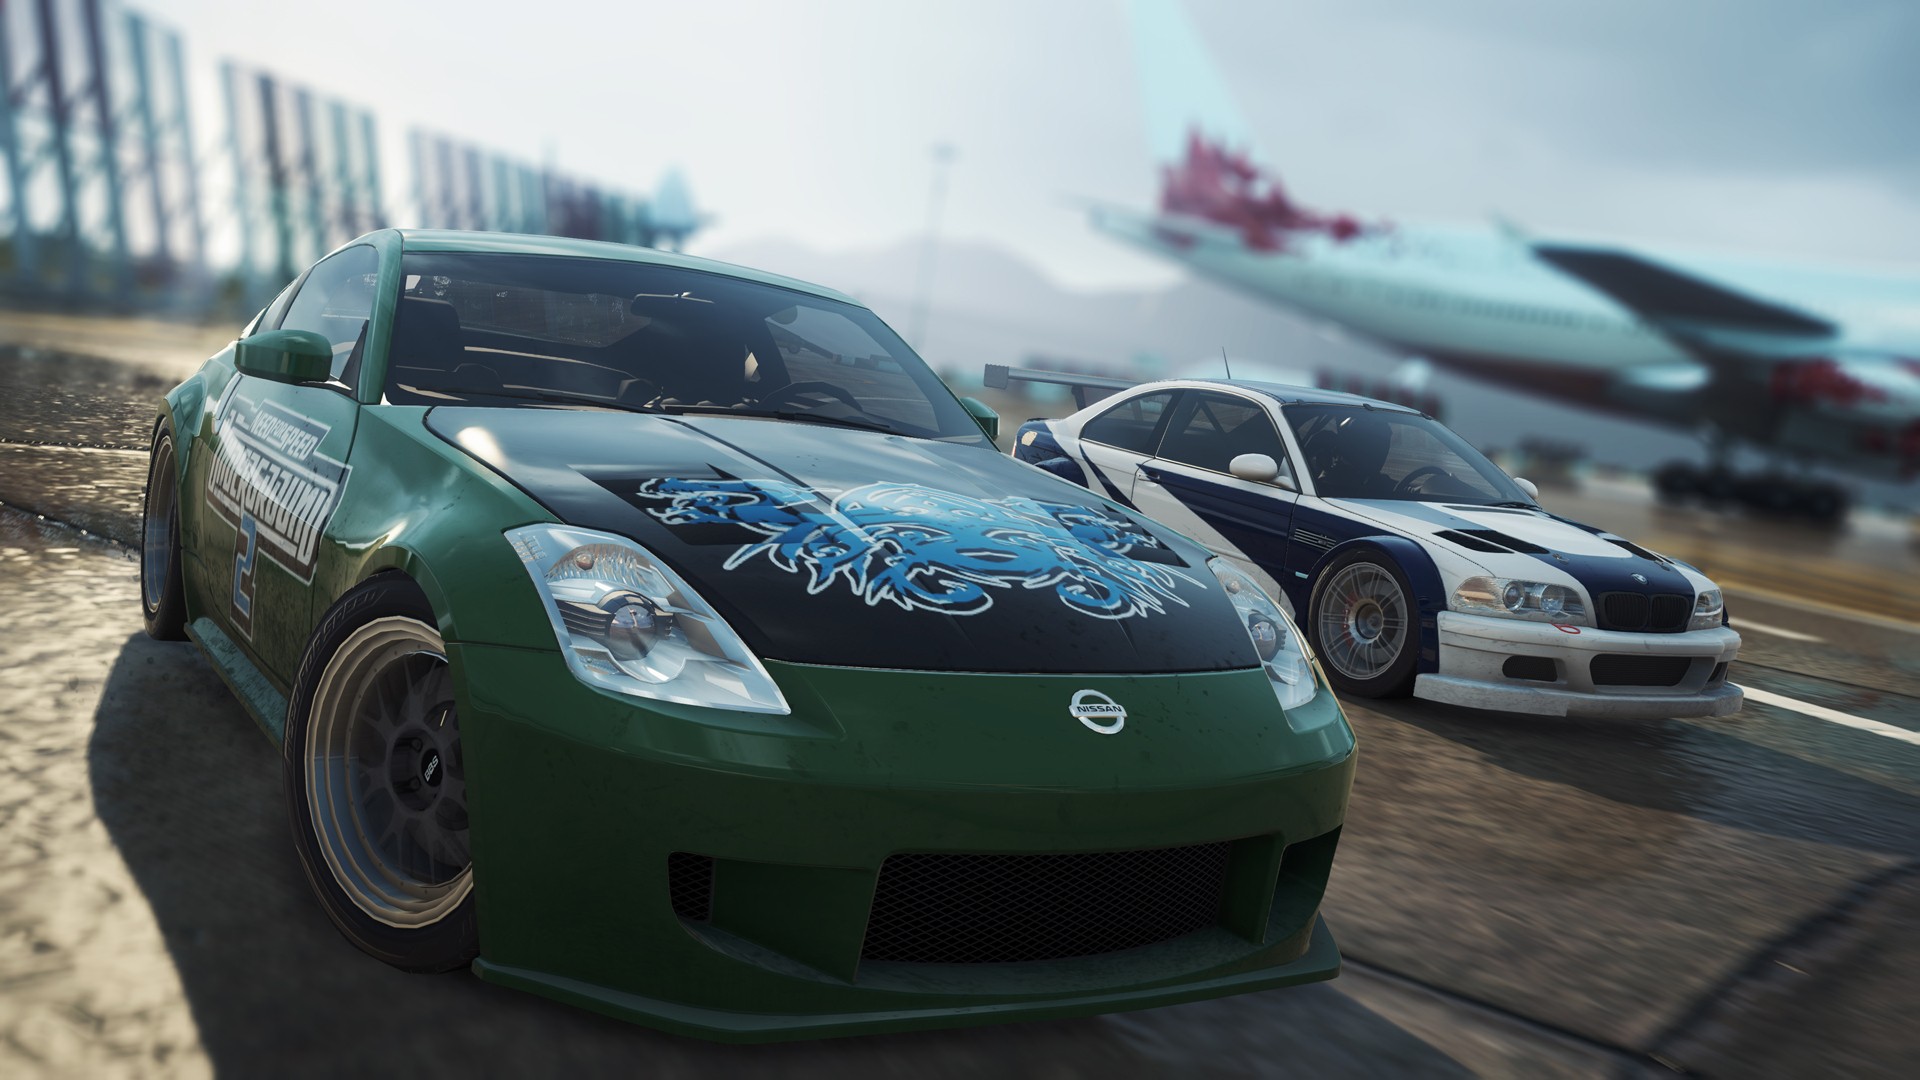 Nfs Most Wanted 2012 Dlc Cars Download